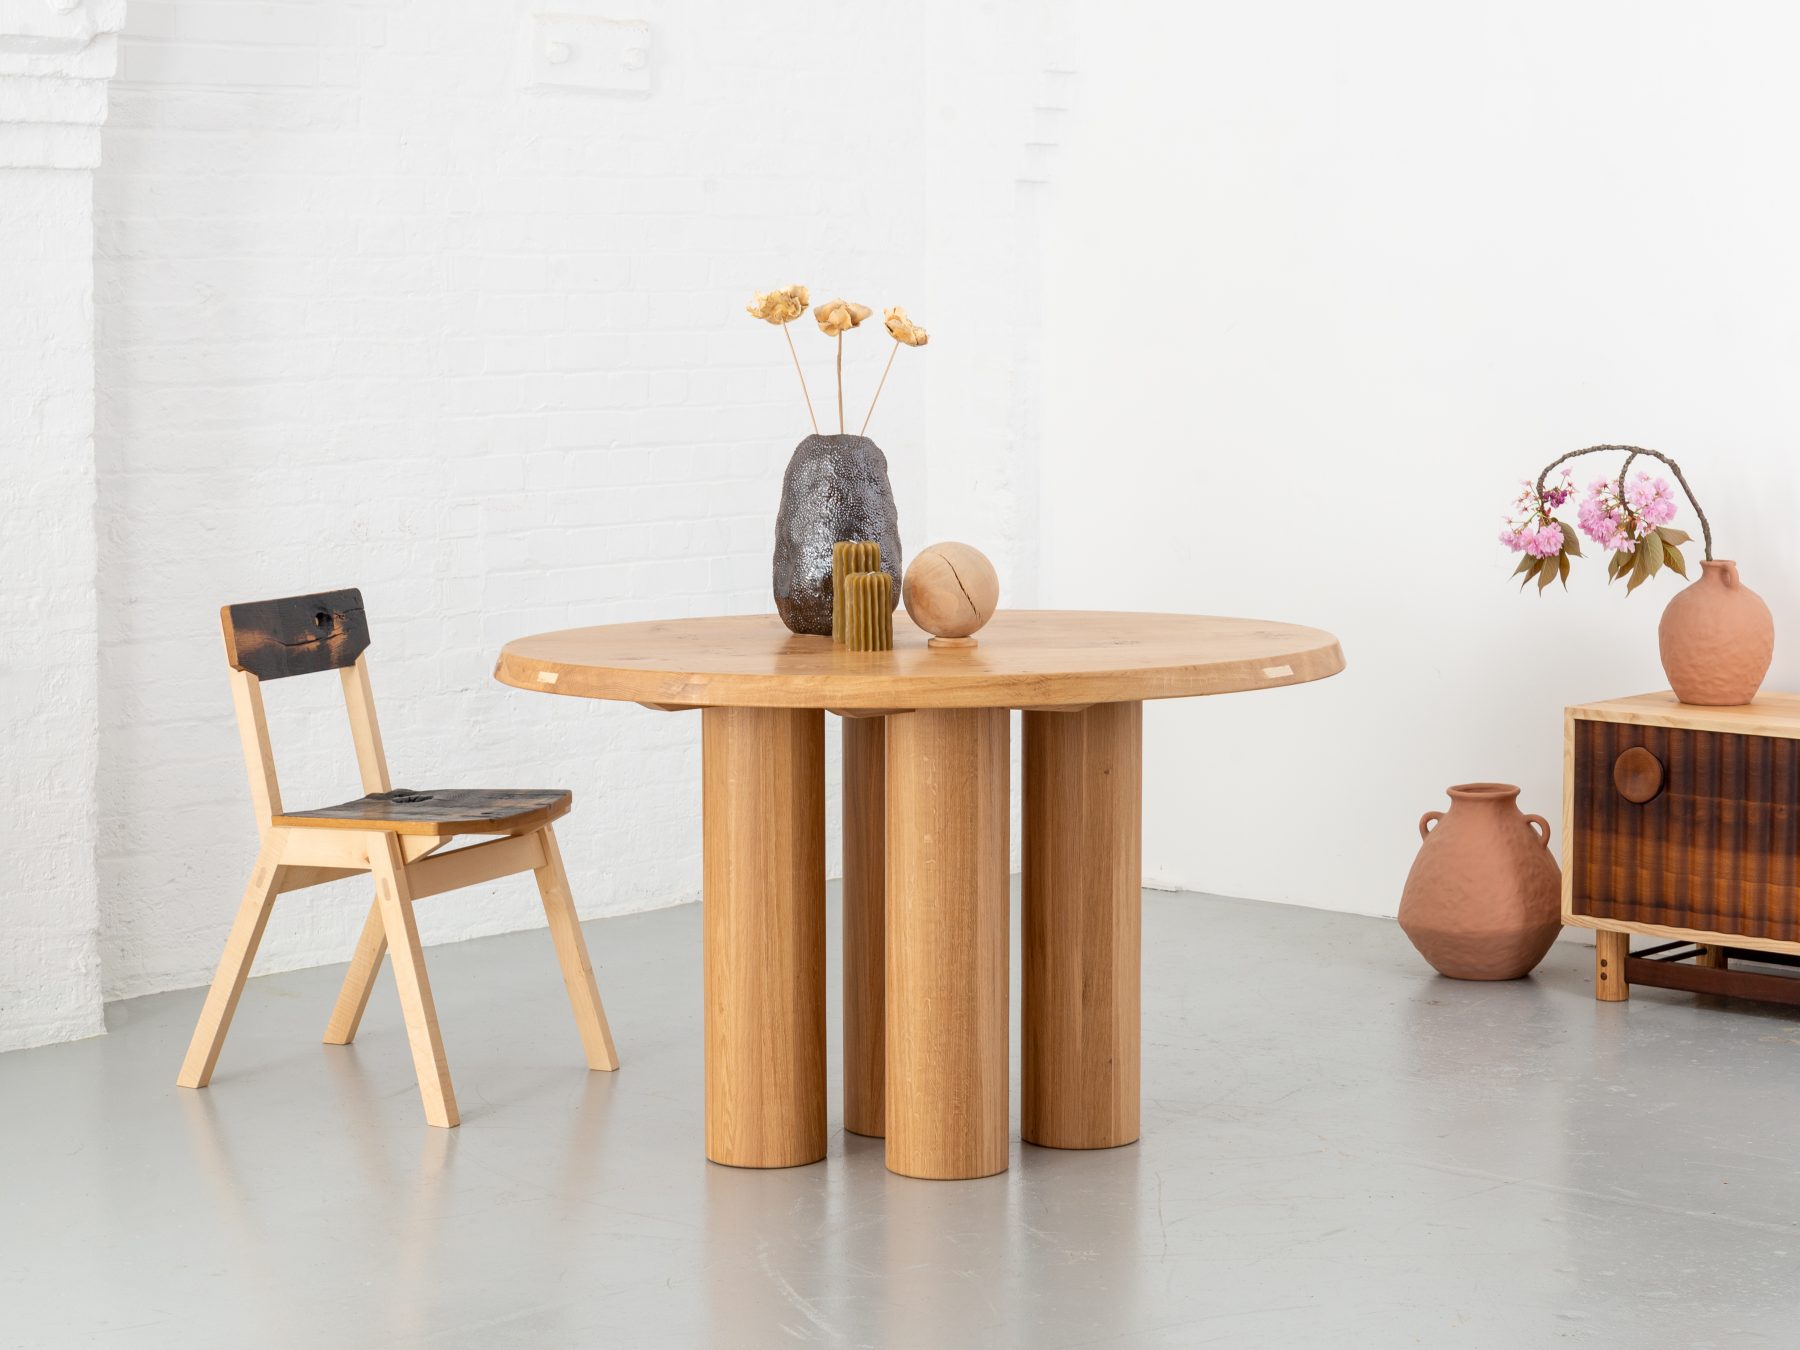 Jan Hendzel oval staved table styled